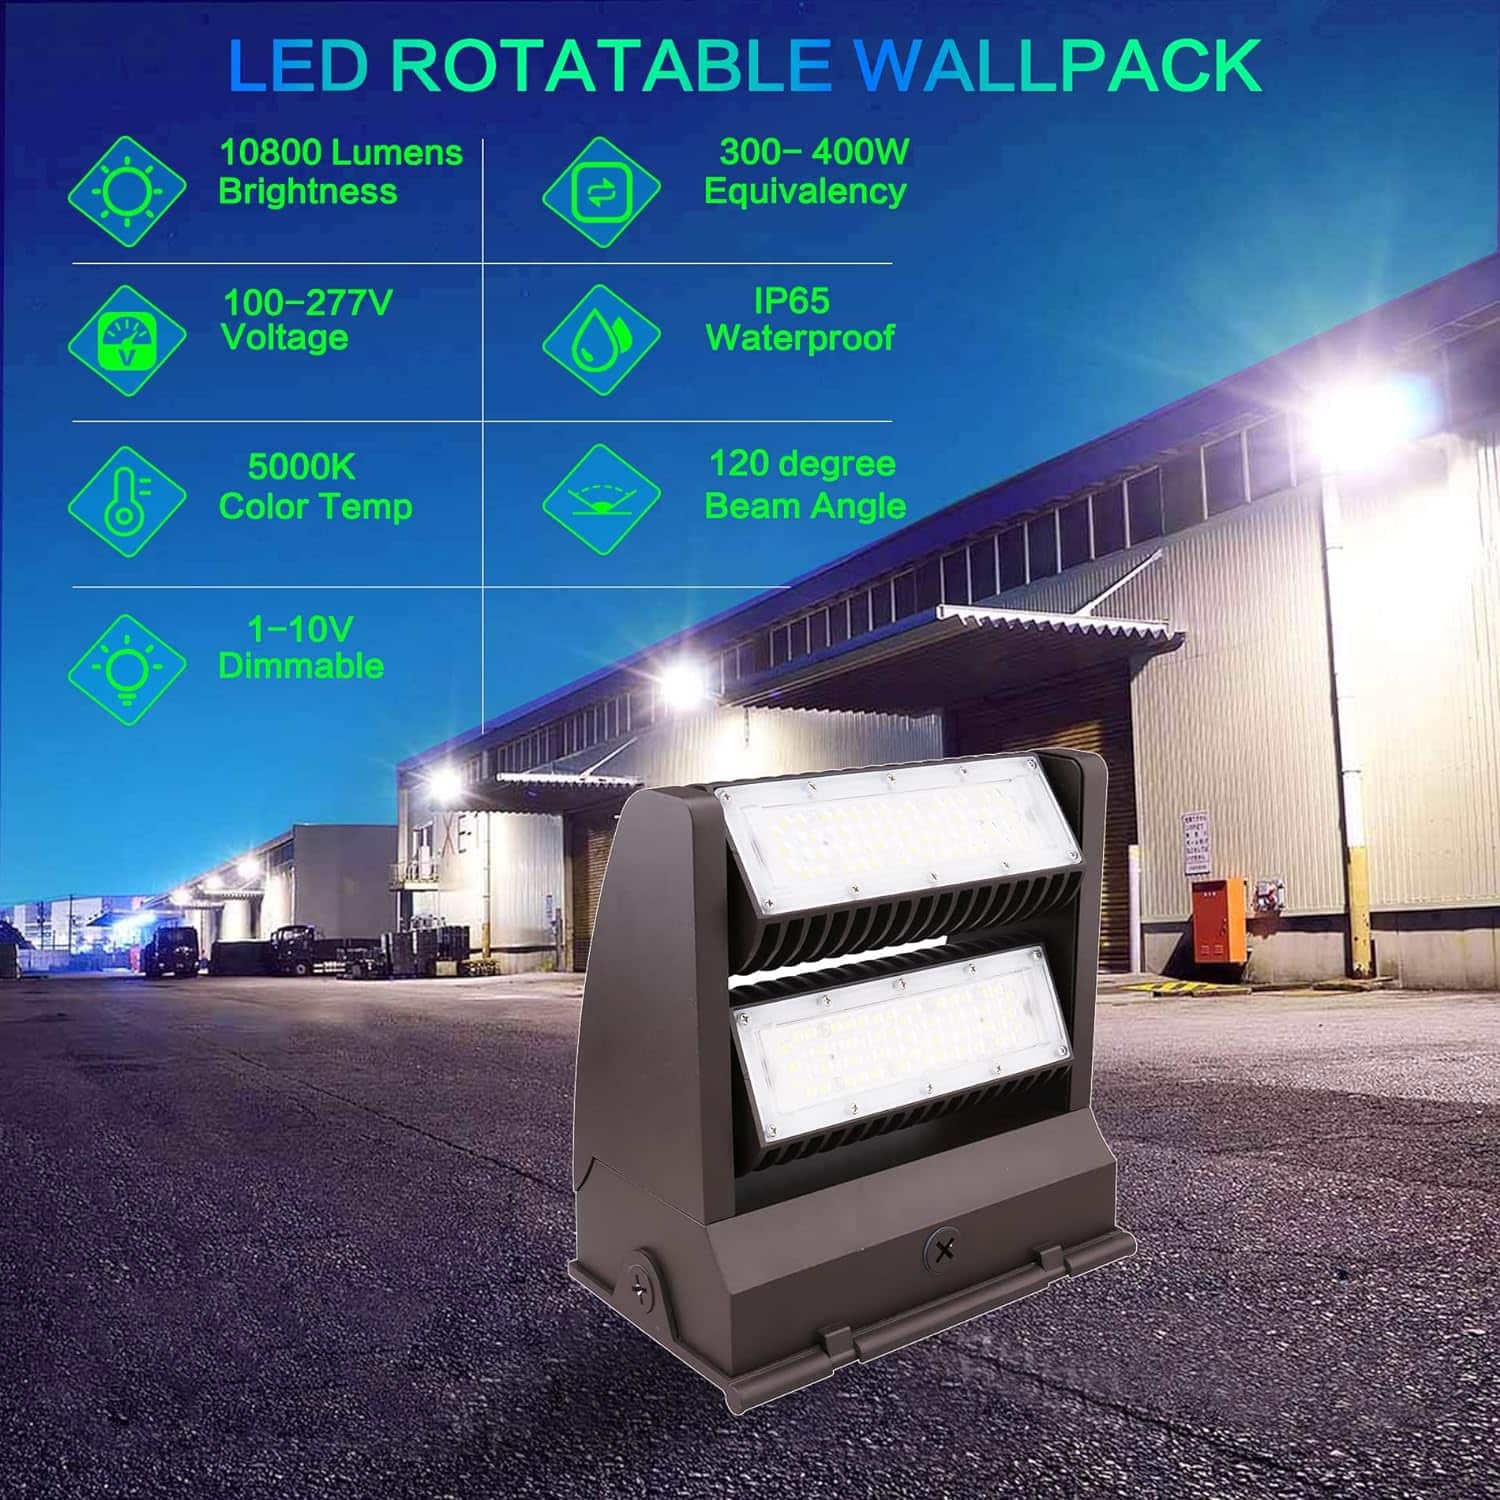 Rotatable LED Wall Pack Light 80W 5000K 10,800 lumens, Adjustable Head LED Wall Pack Light - Great for Area Light, Warehouse, Industrial and Commercial Use (80W)